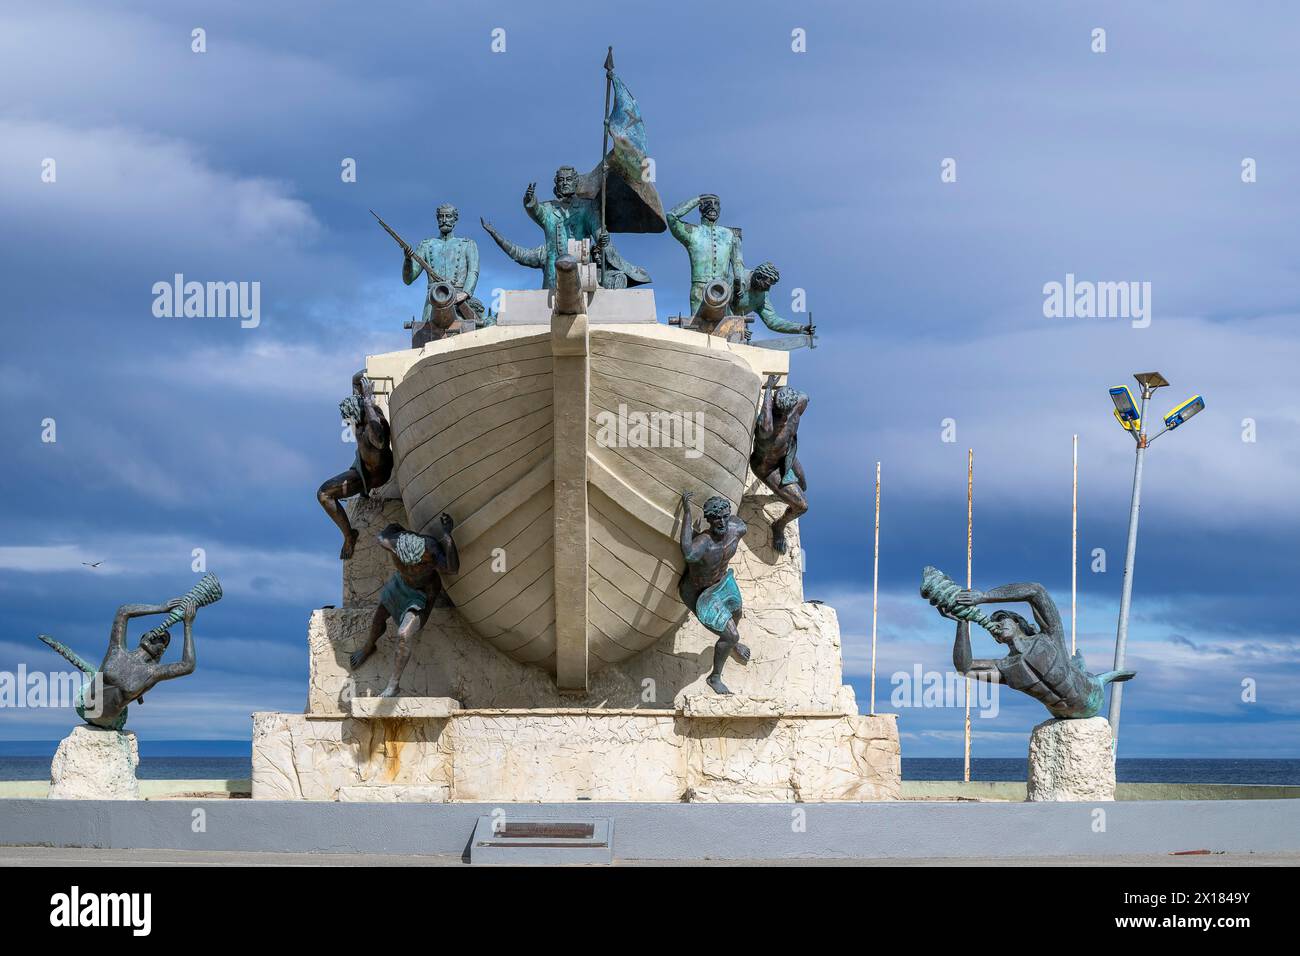 Monumento A Tripulantes Galeta Ancud, monument to the crew members of the schooner Ancud 1843 on the Strait of Magellan, Punta Arenas, city in Stock Photo